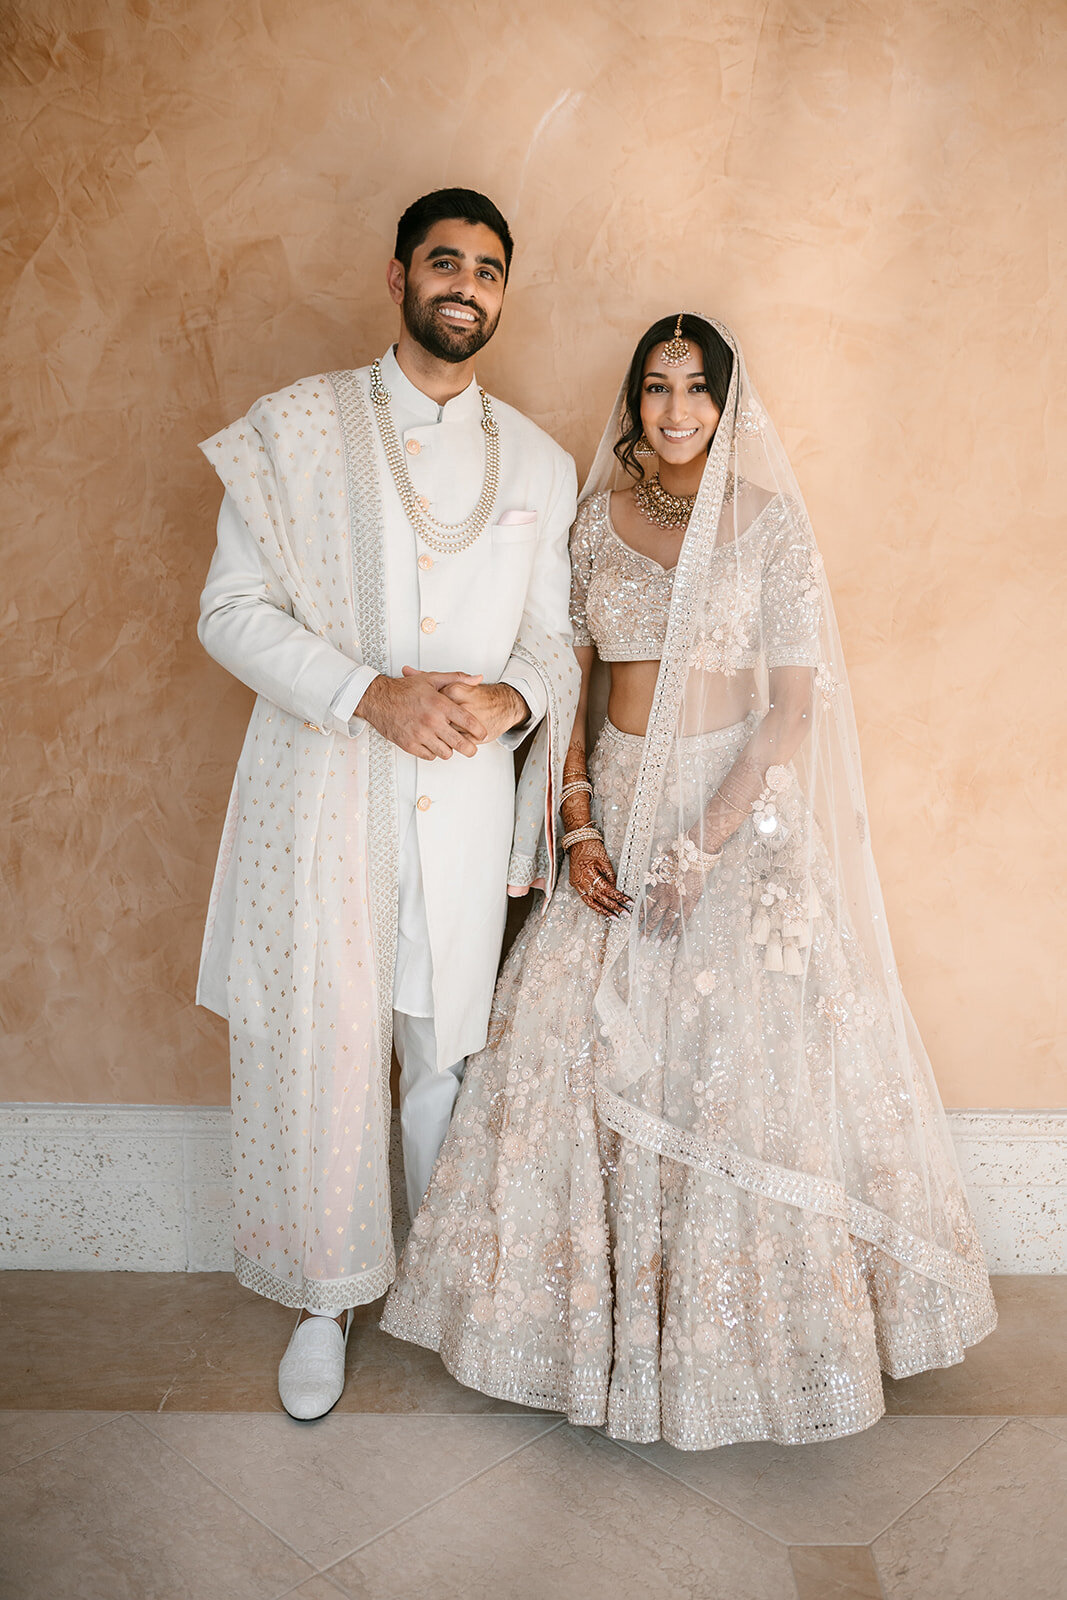 Miami Intimate Indian Wedding_Kristelle Boulos Photography-44